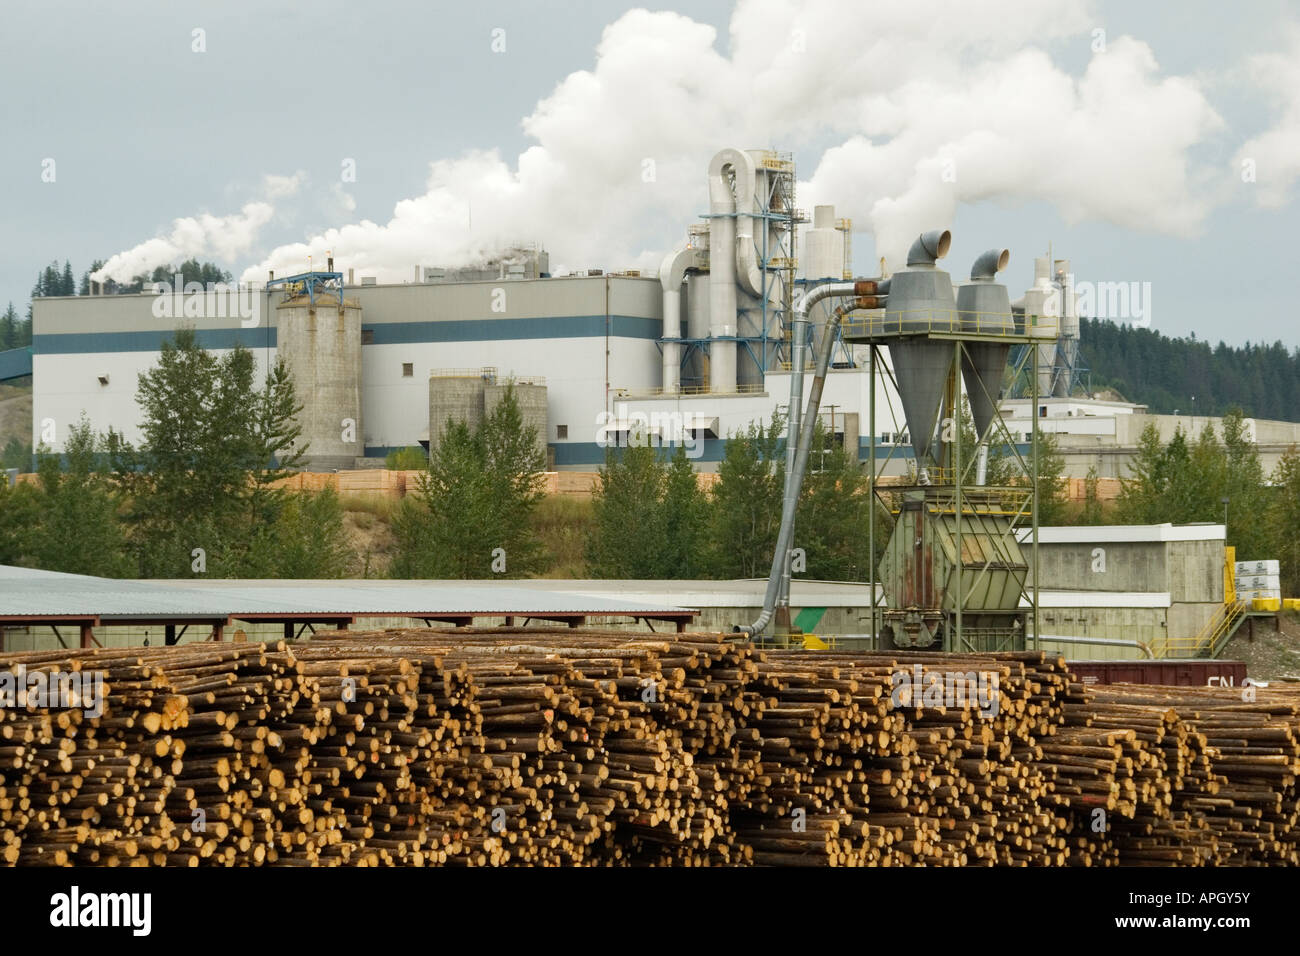 Wood processing plant at Two-Mile Flat, Quesnel, British Columbia, Canada Stock Photo